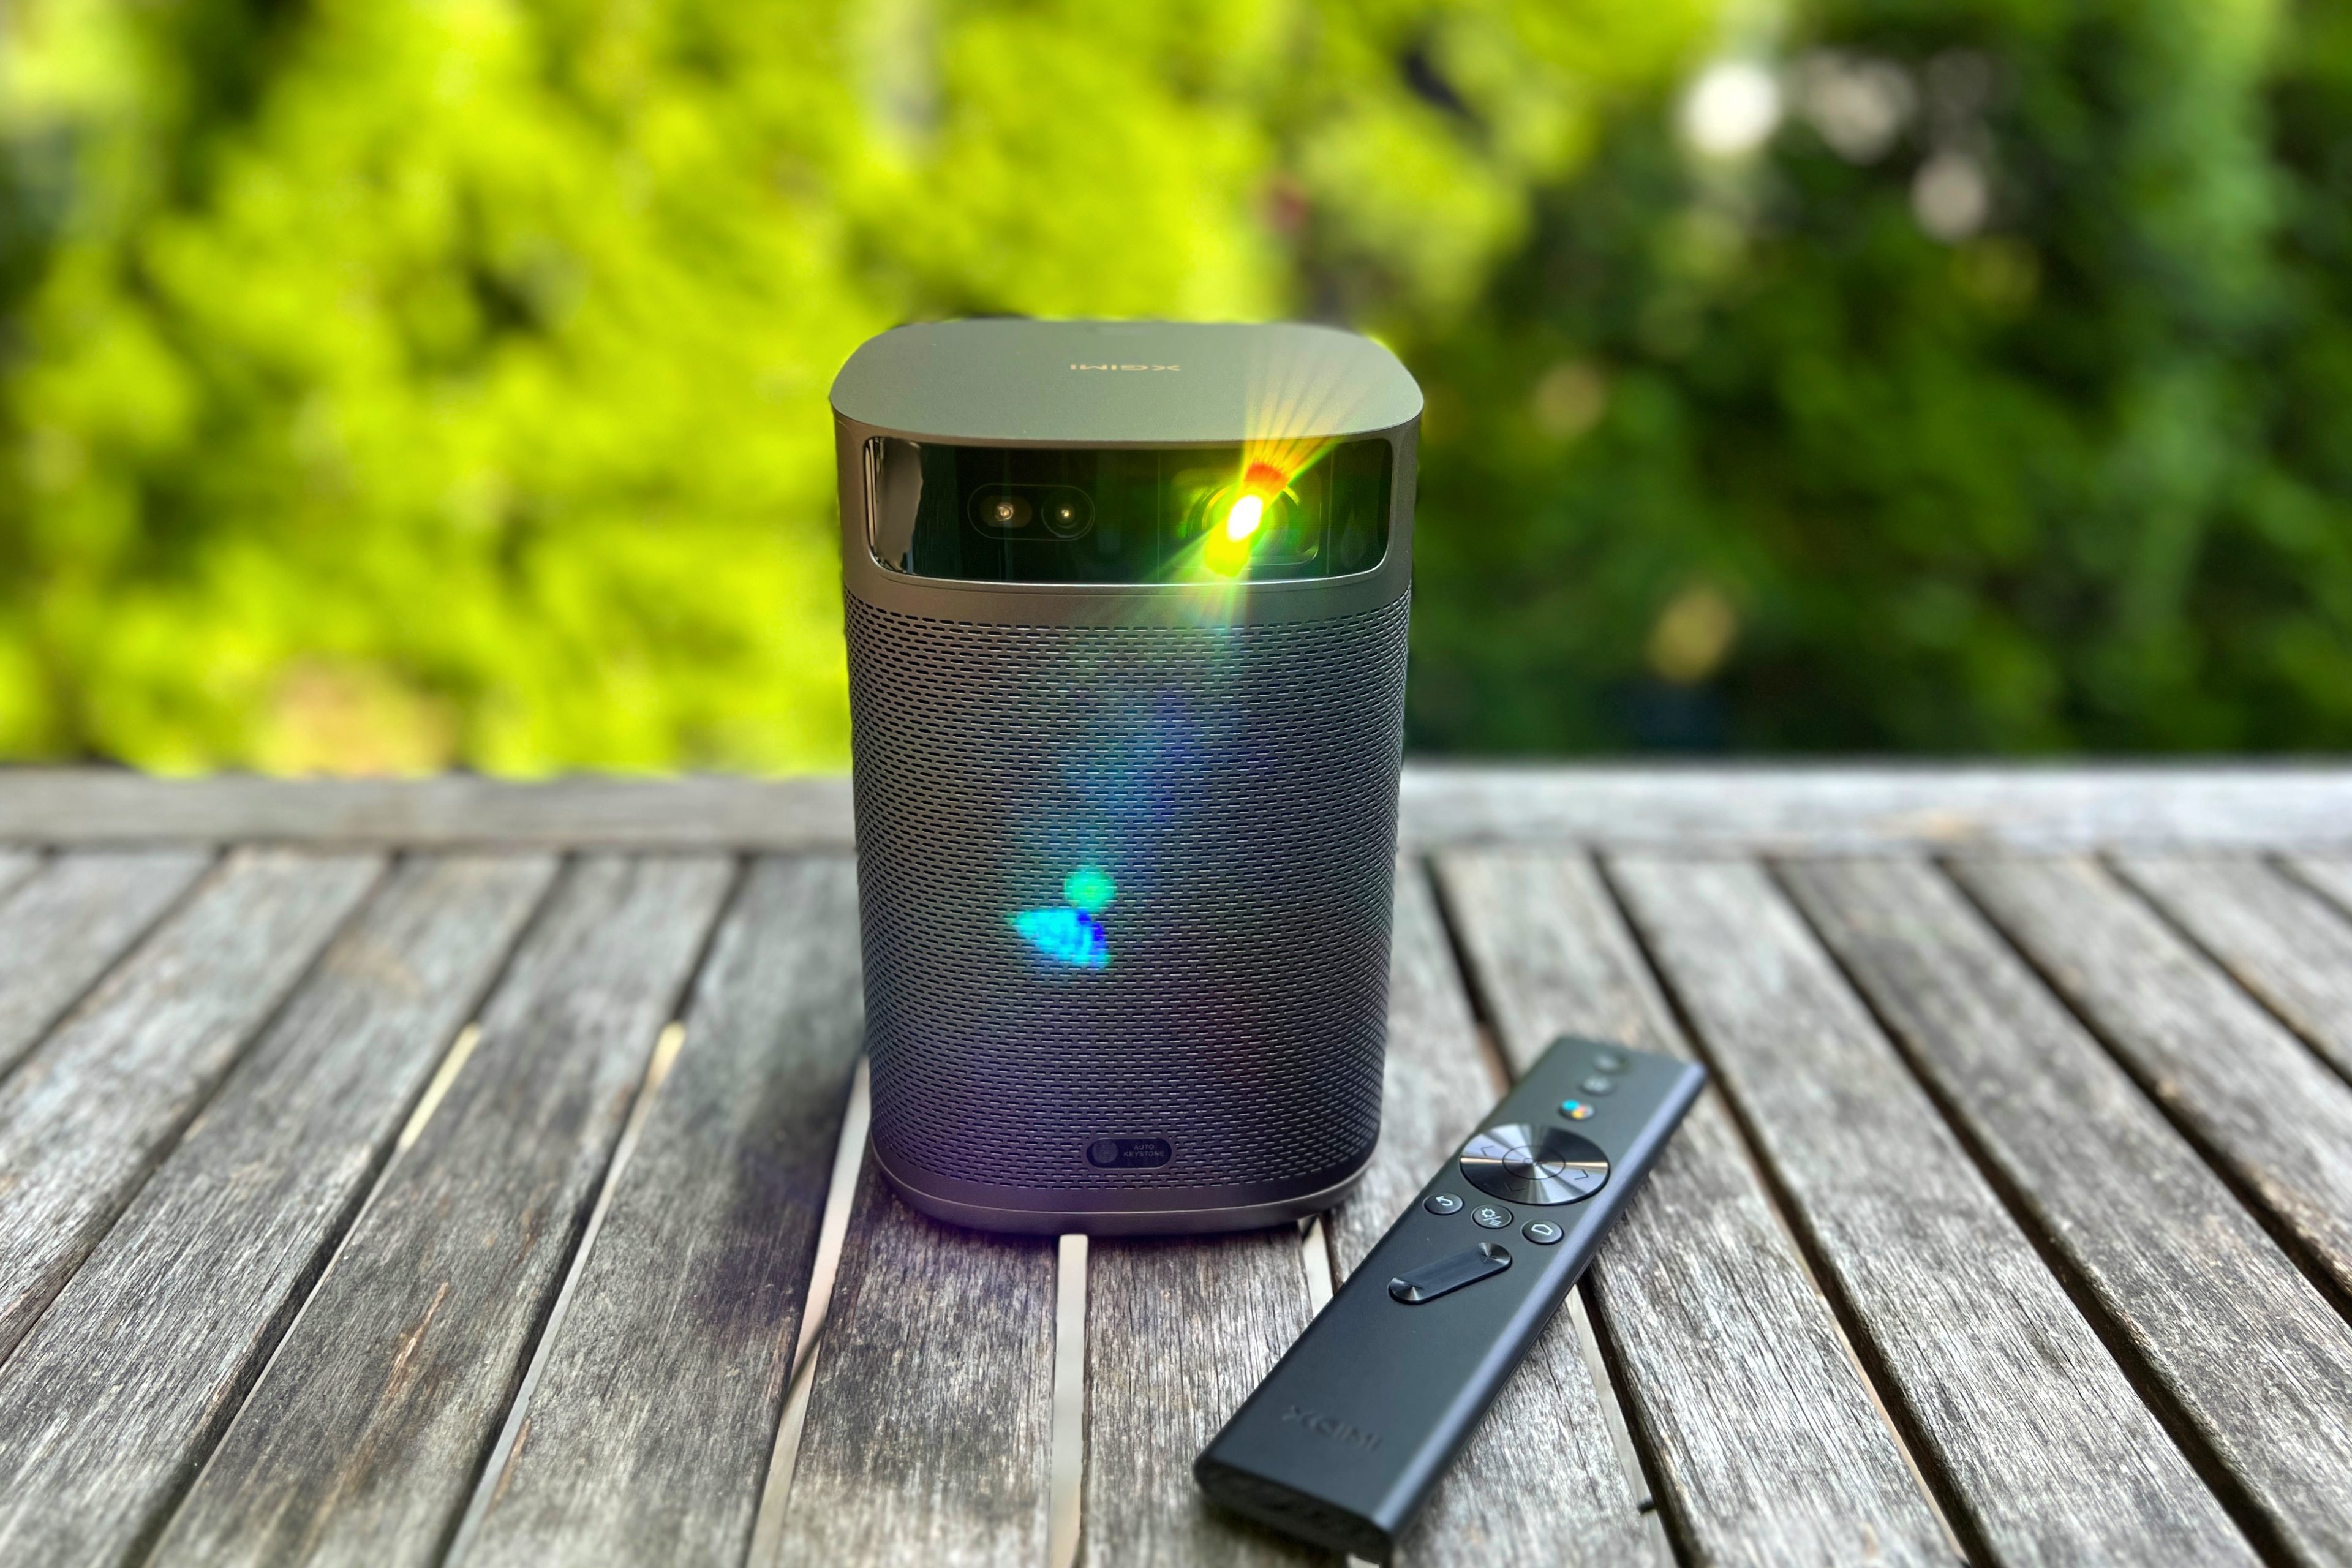 XGIMI Mogo 2 Pro Review: Brighter and smarter